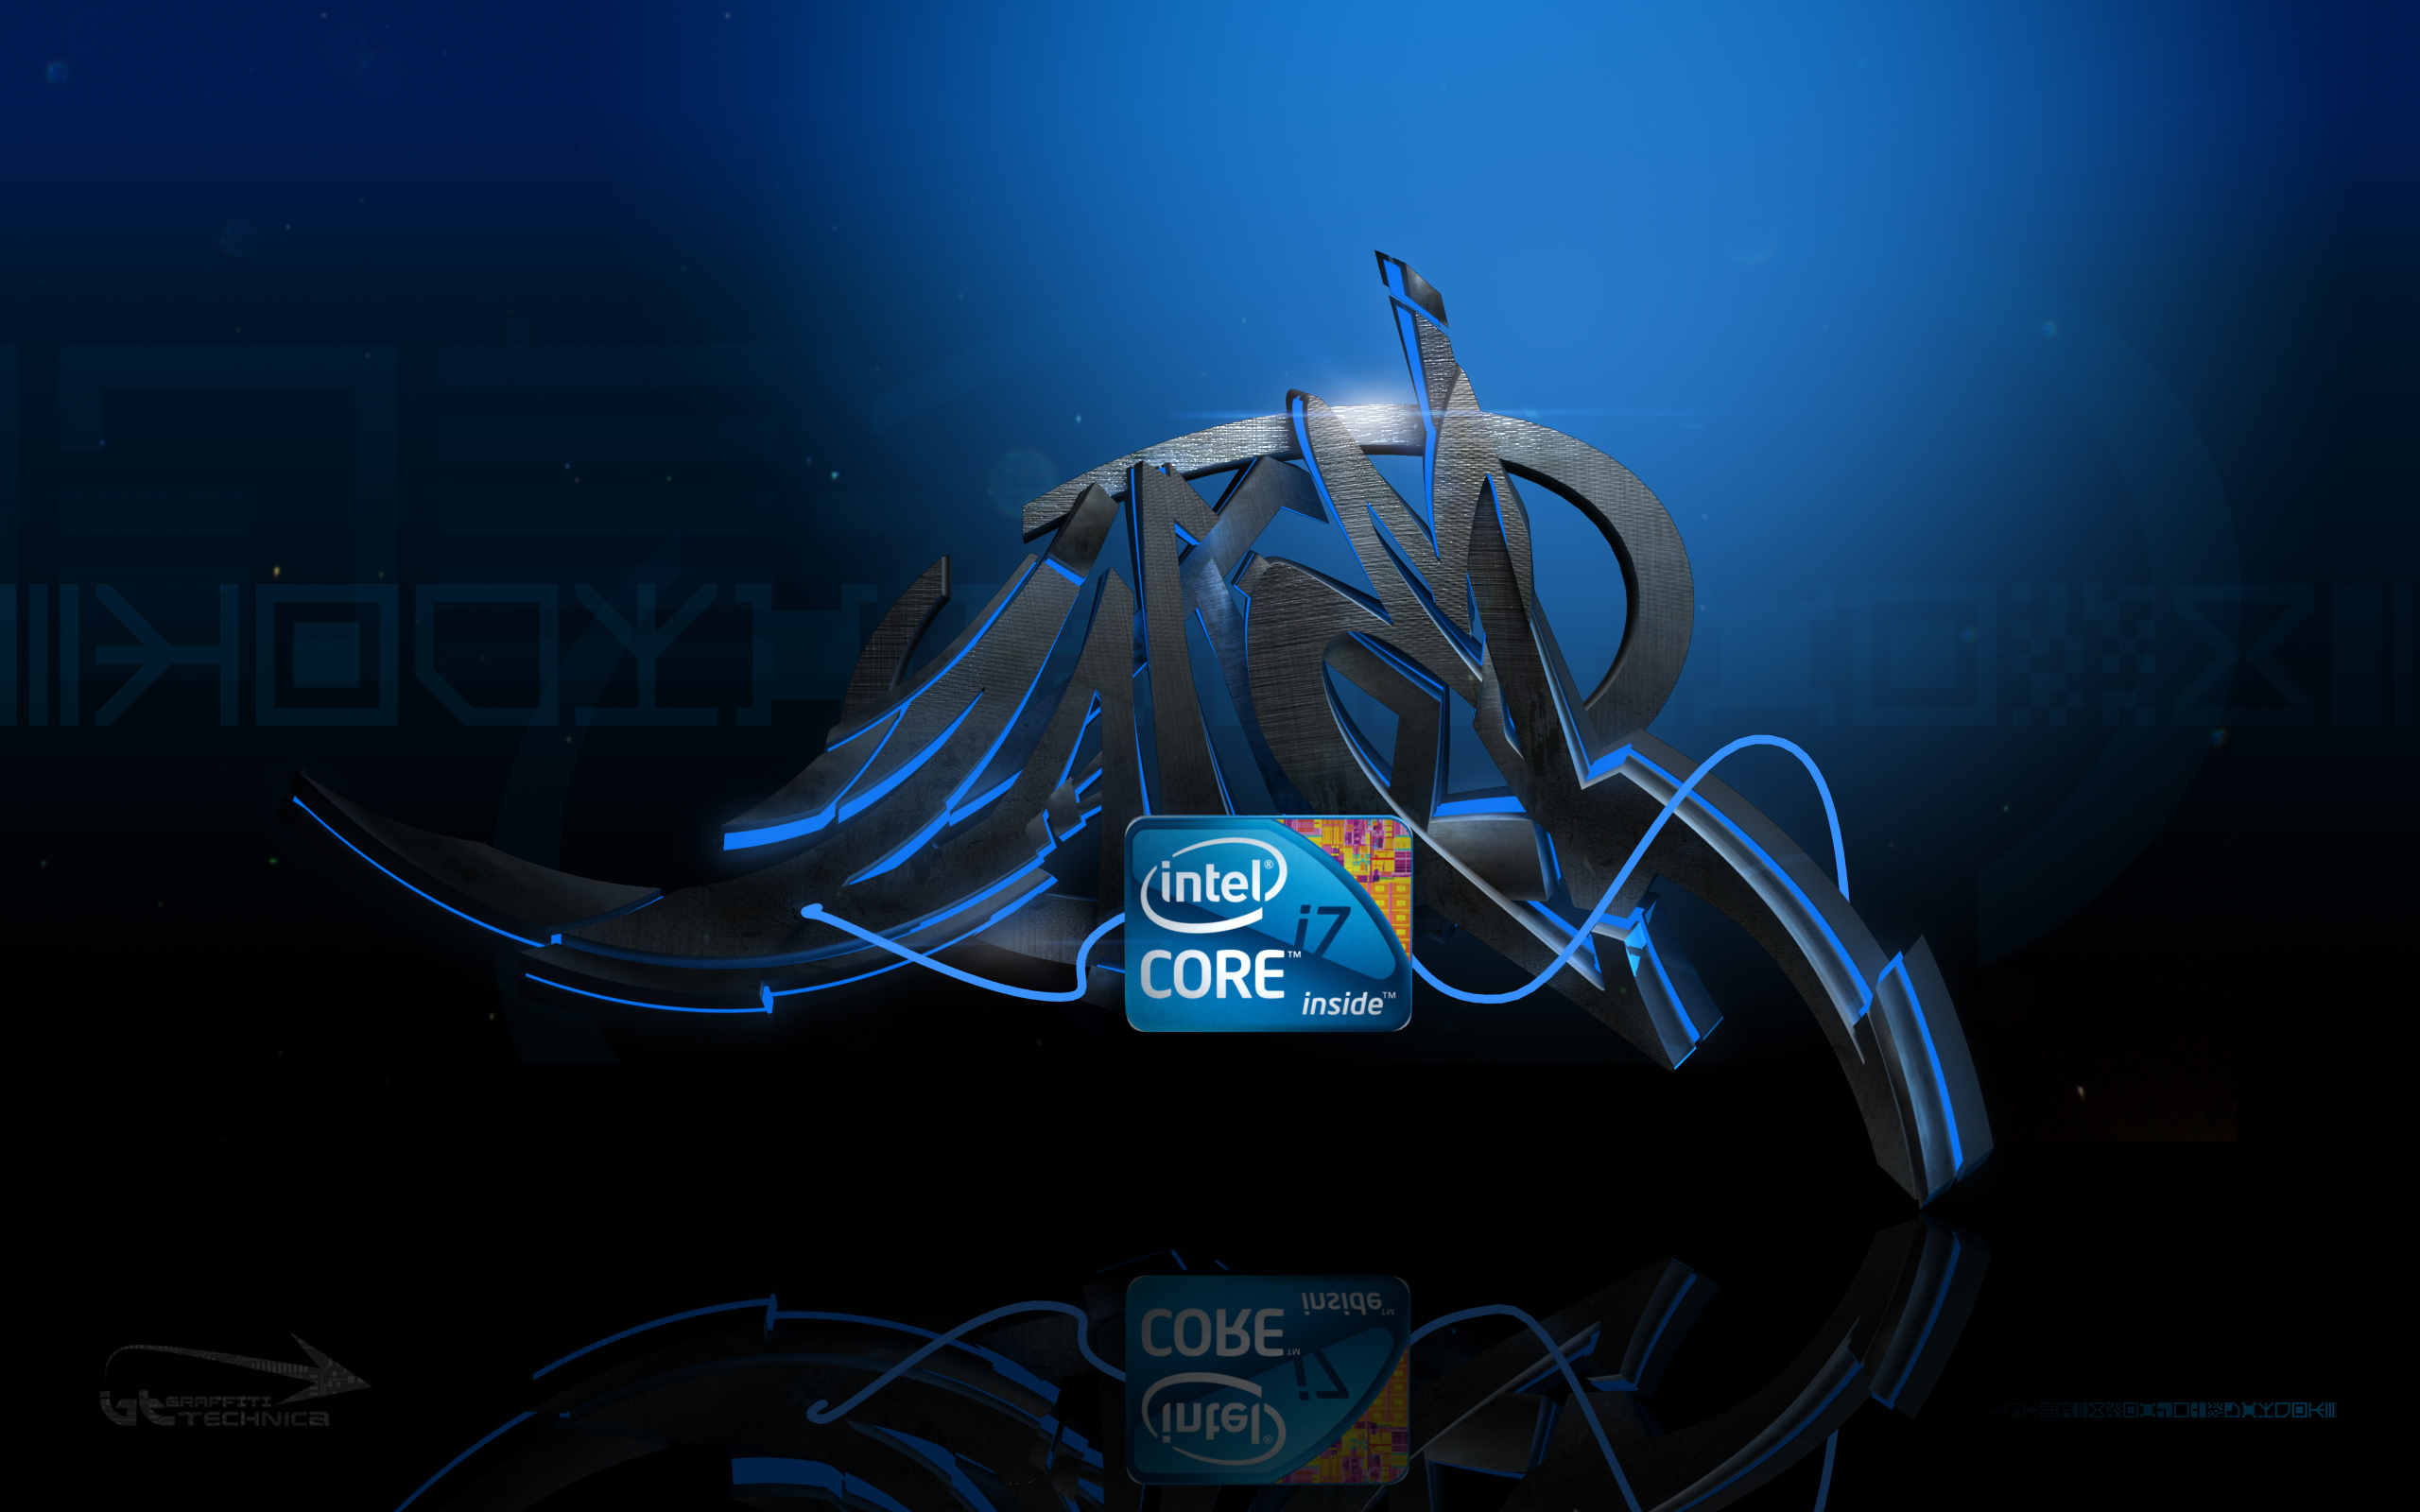 Intel HD Wallpapers Intel Computer Wallpapers High Definition intel